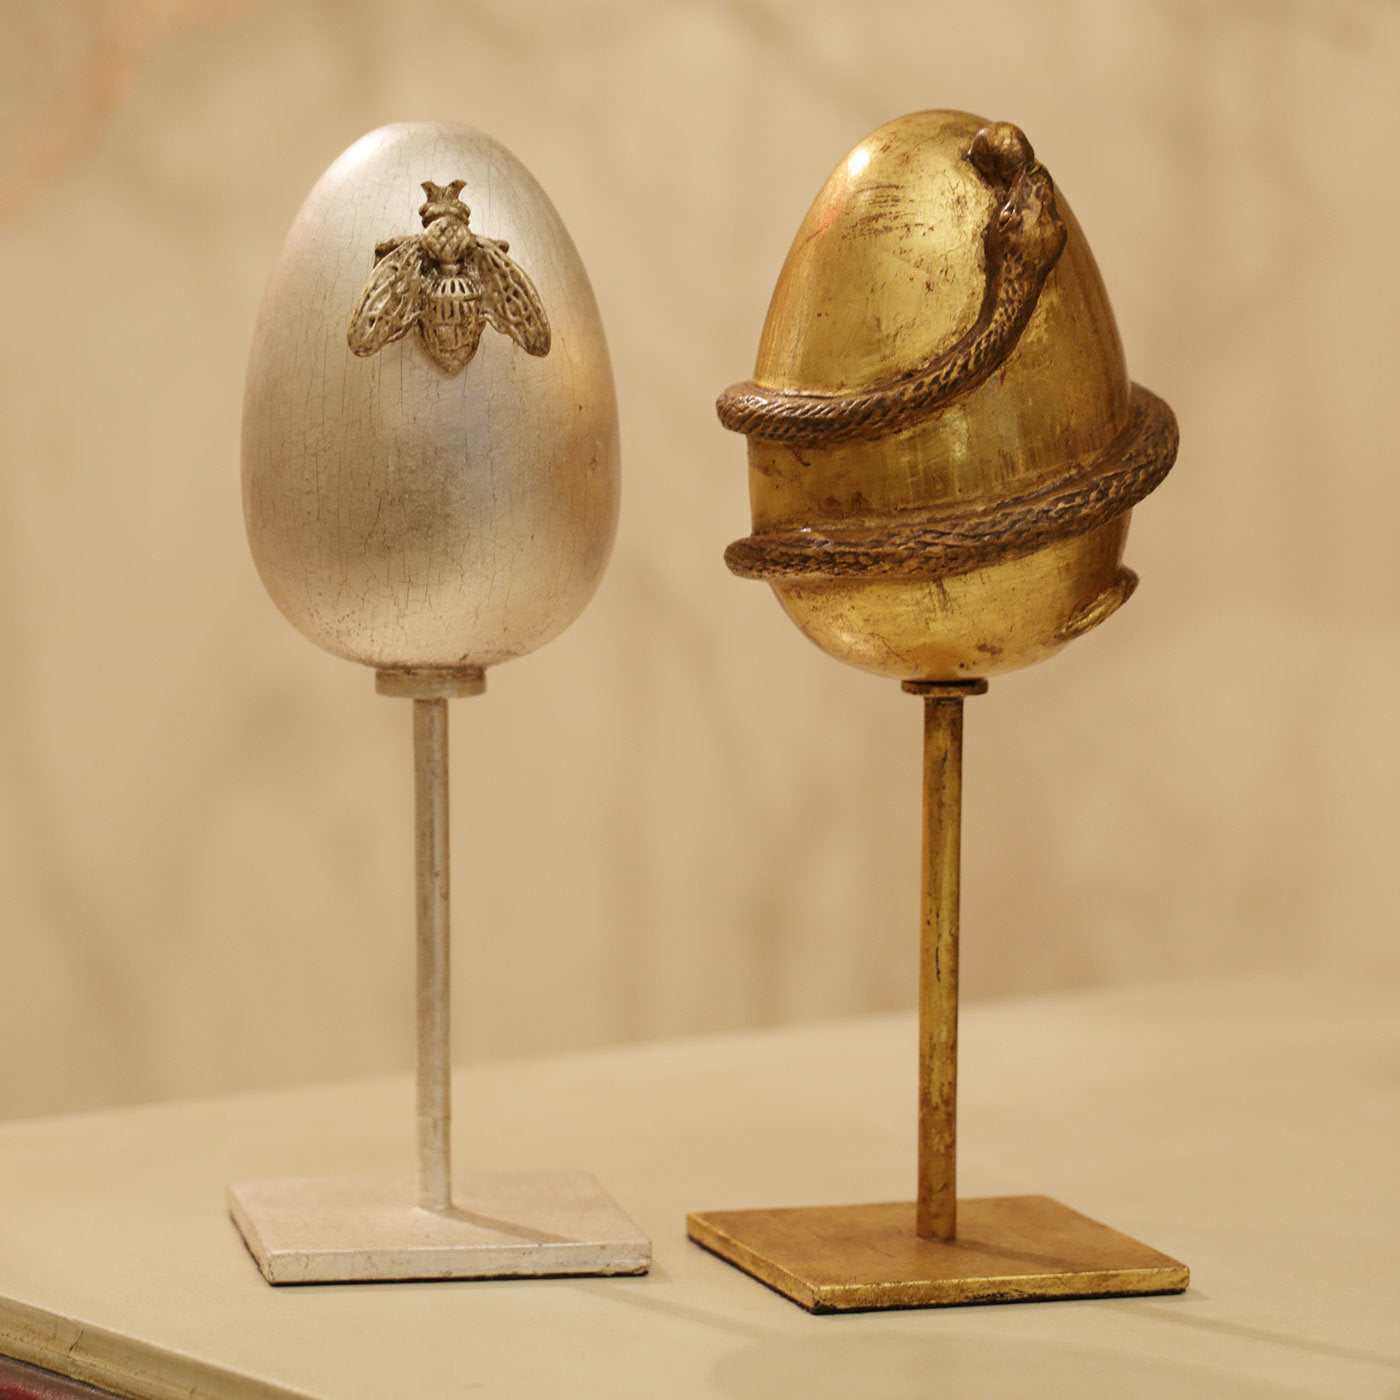 Partenope Egg N°3 Small Sculpture - Alternative view 2